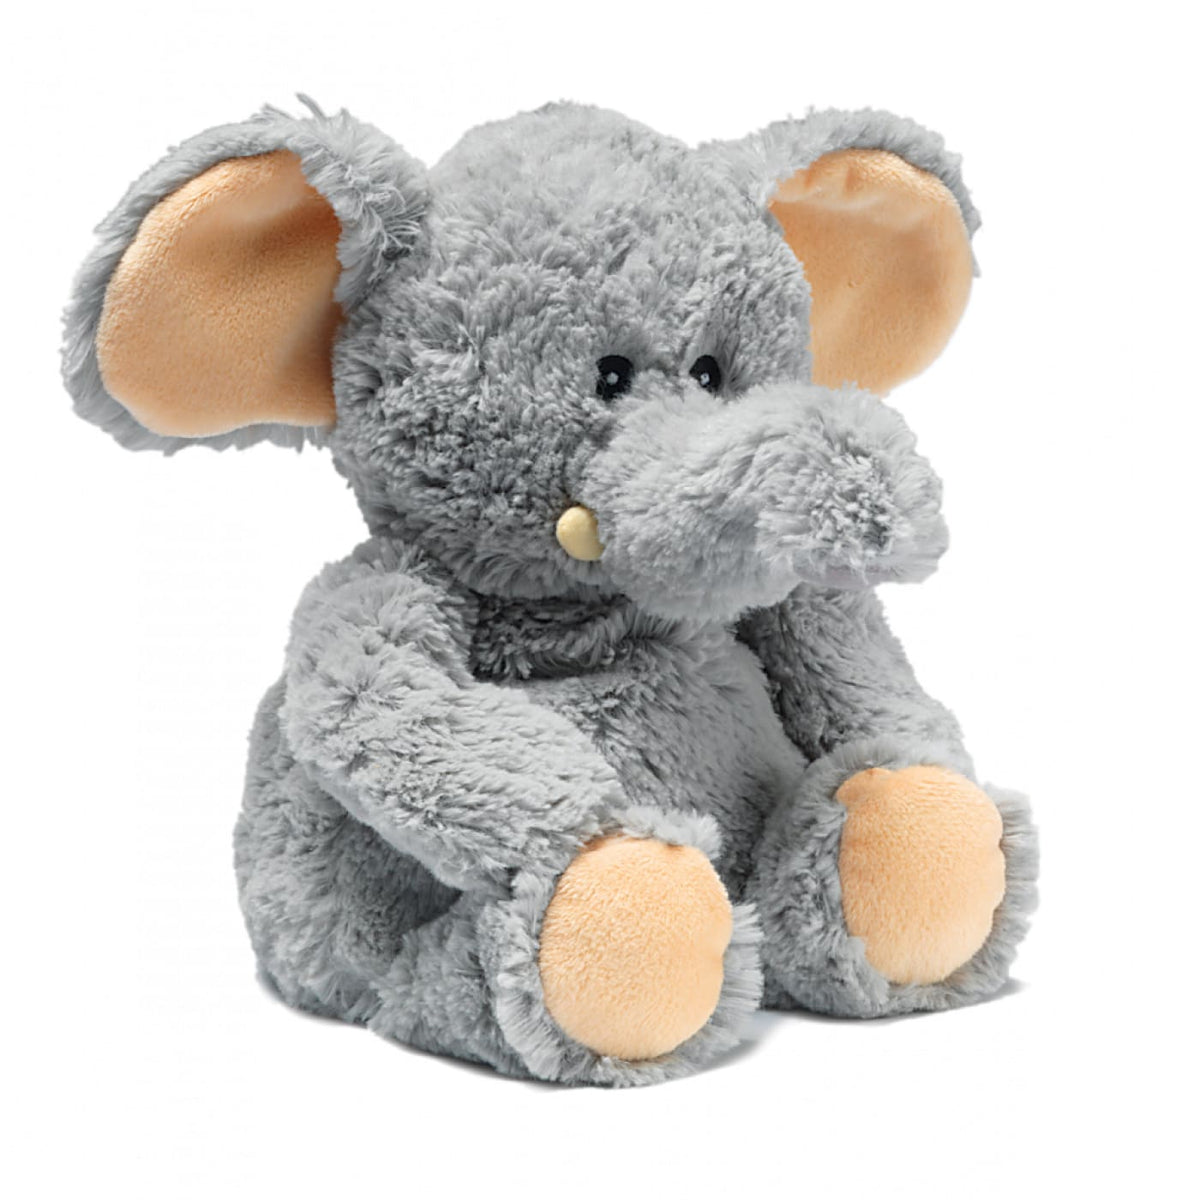 Warmies Heatable Soft Toy Scented with French Lavender - Elephant - Elephant - HEALTH &amp; HOME SAFETY - THERMOMETERS/MEDICINAL